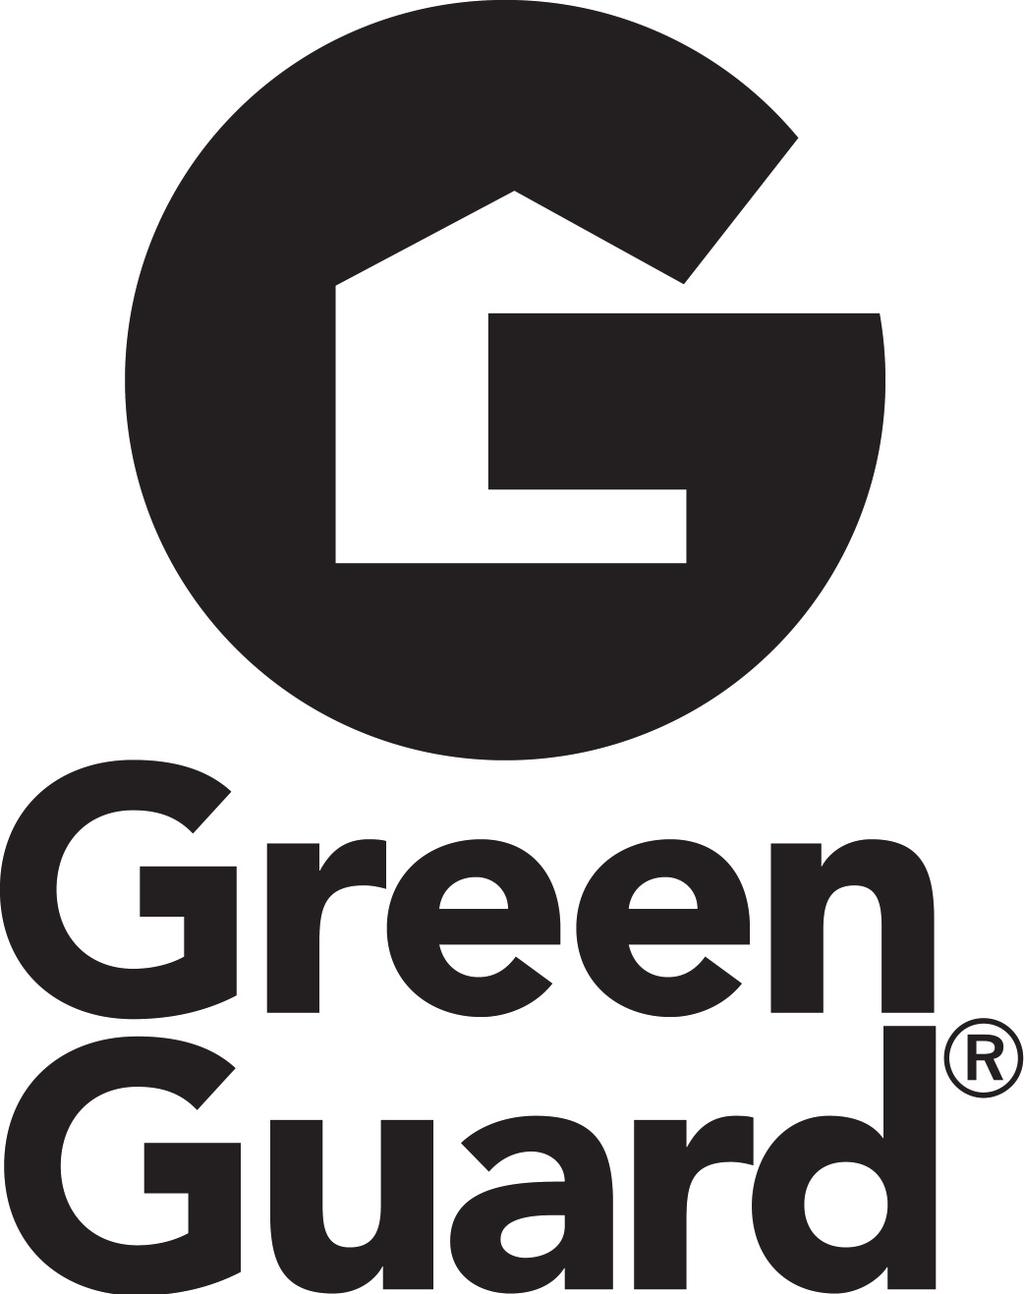 Pactiv Building Products 2100 RiverEdge Parkway Suite 175 Atlanta, GA 30328 Toll Free: (800) 241-4402 Web Site: www.green-guard.com SECTION 07210 THERMAL INSULATION PART 1 - GENERAL 1.